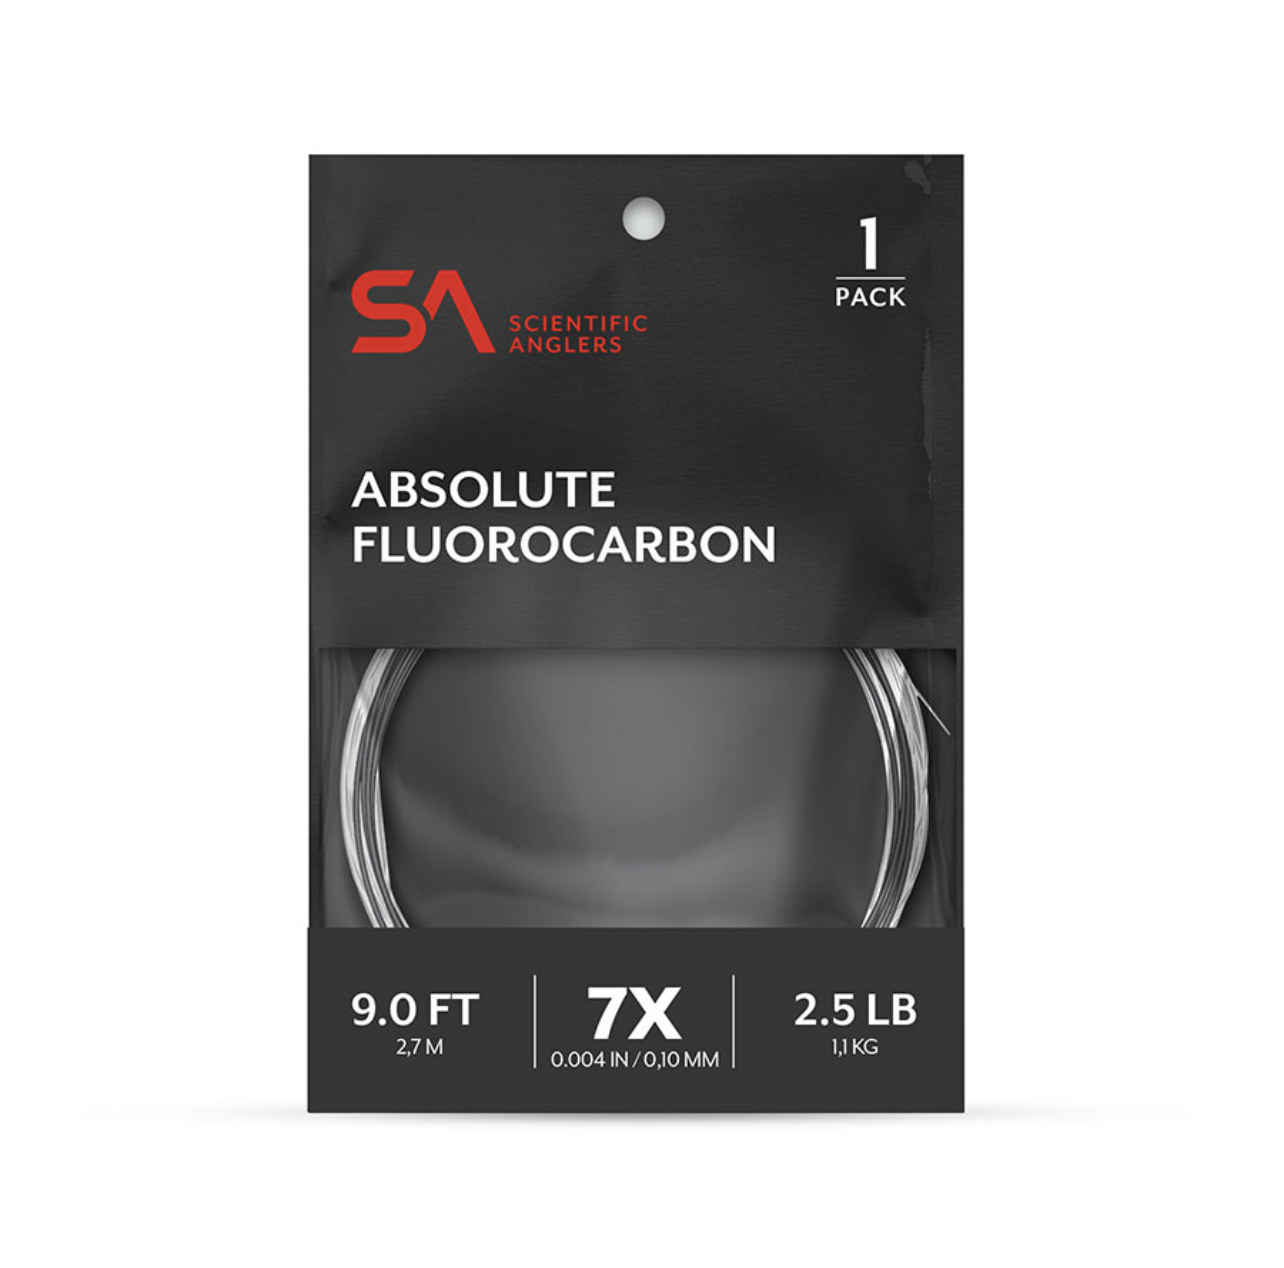 Scientific Anglers Absolute Fluorocarbon Leader - 9ft - 3X - 8.4lb